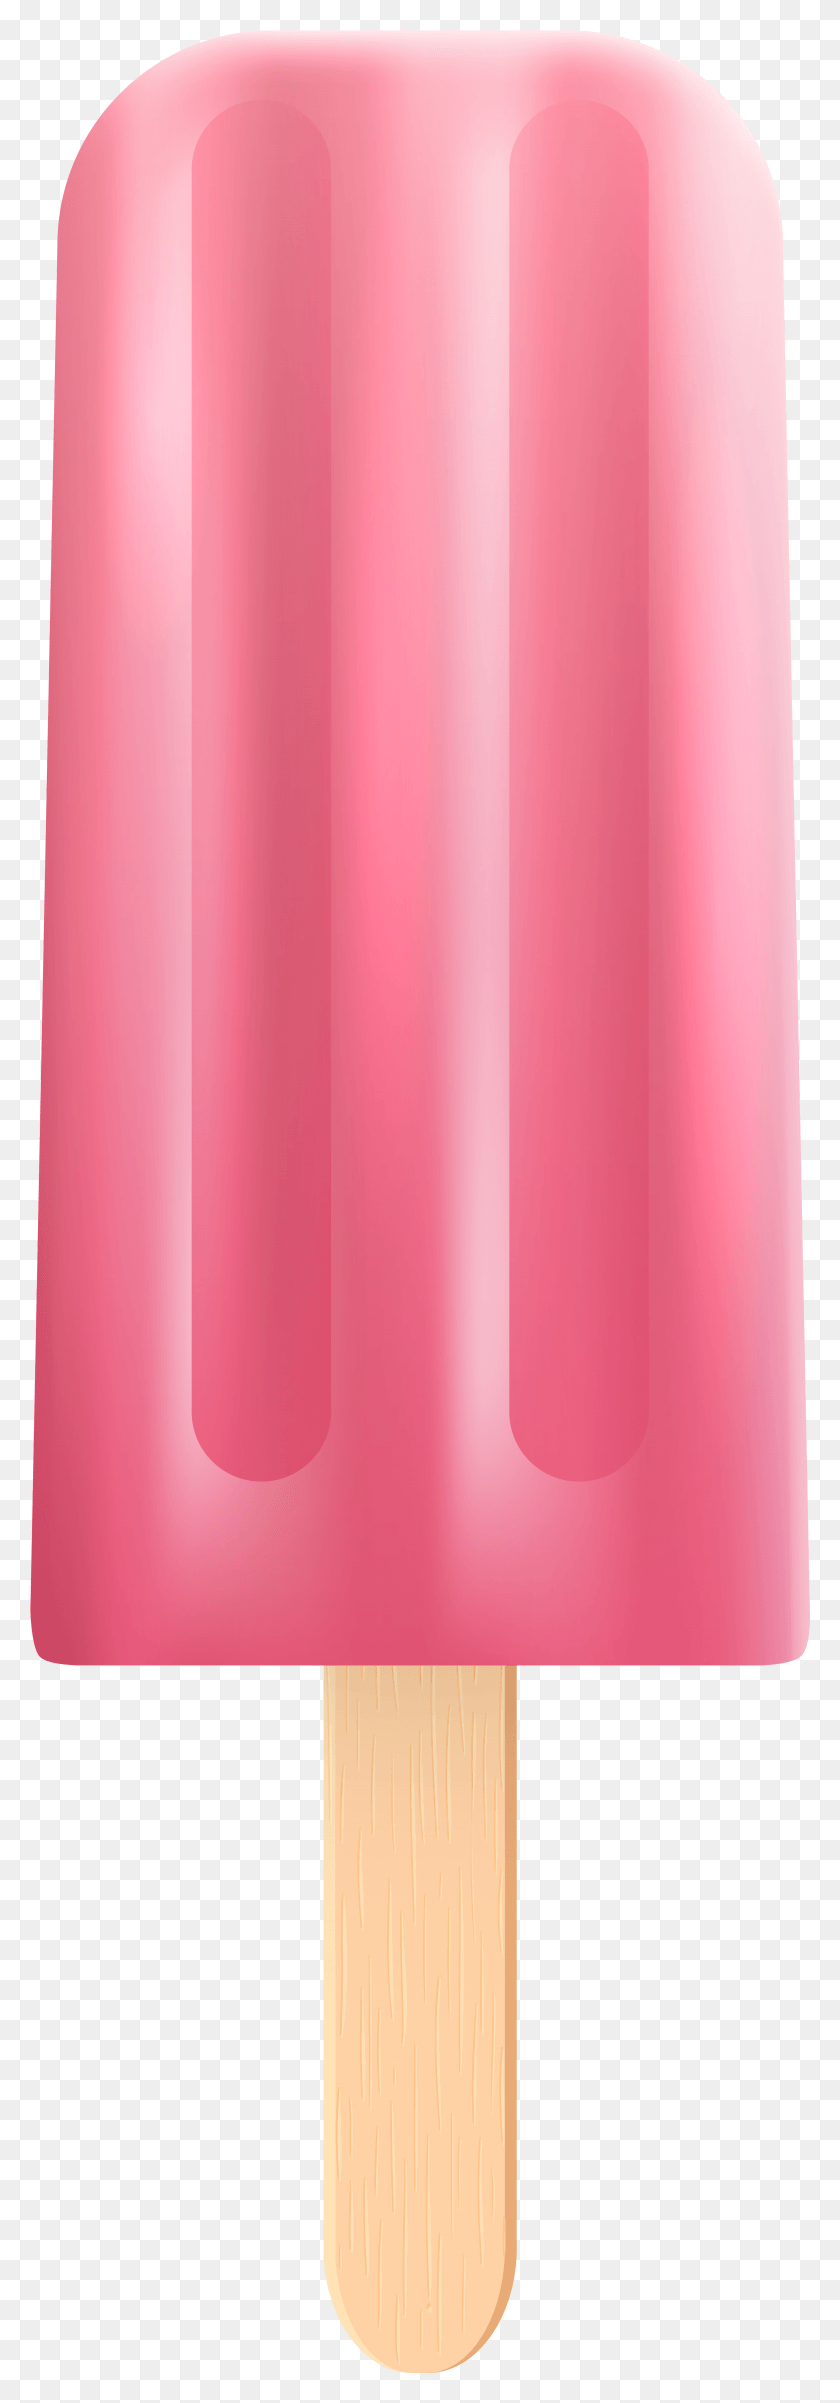 2620x7872 View Full Size Lampshade, Cylinder, Soda, Beverage Descargar Hd Png